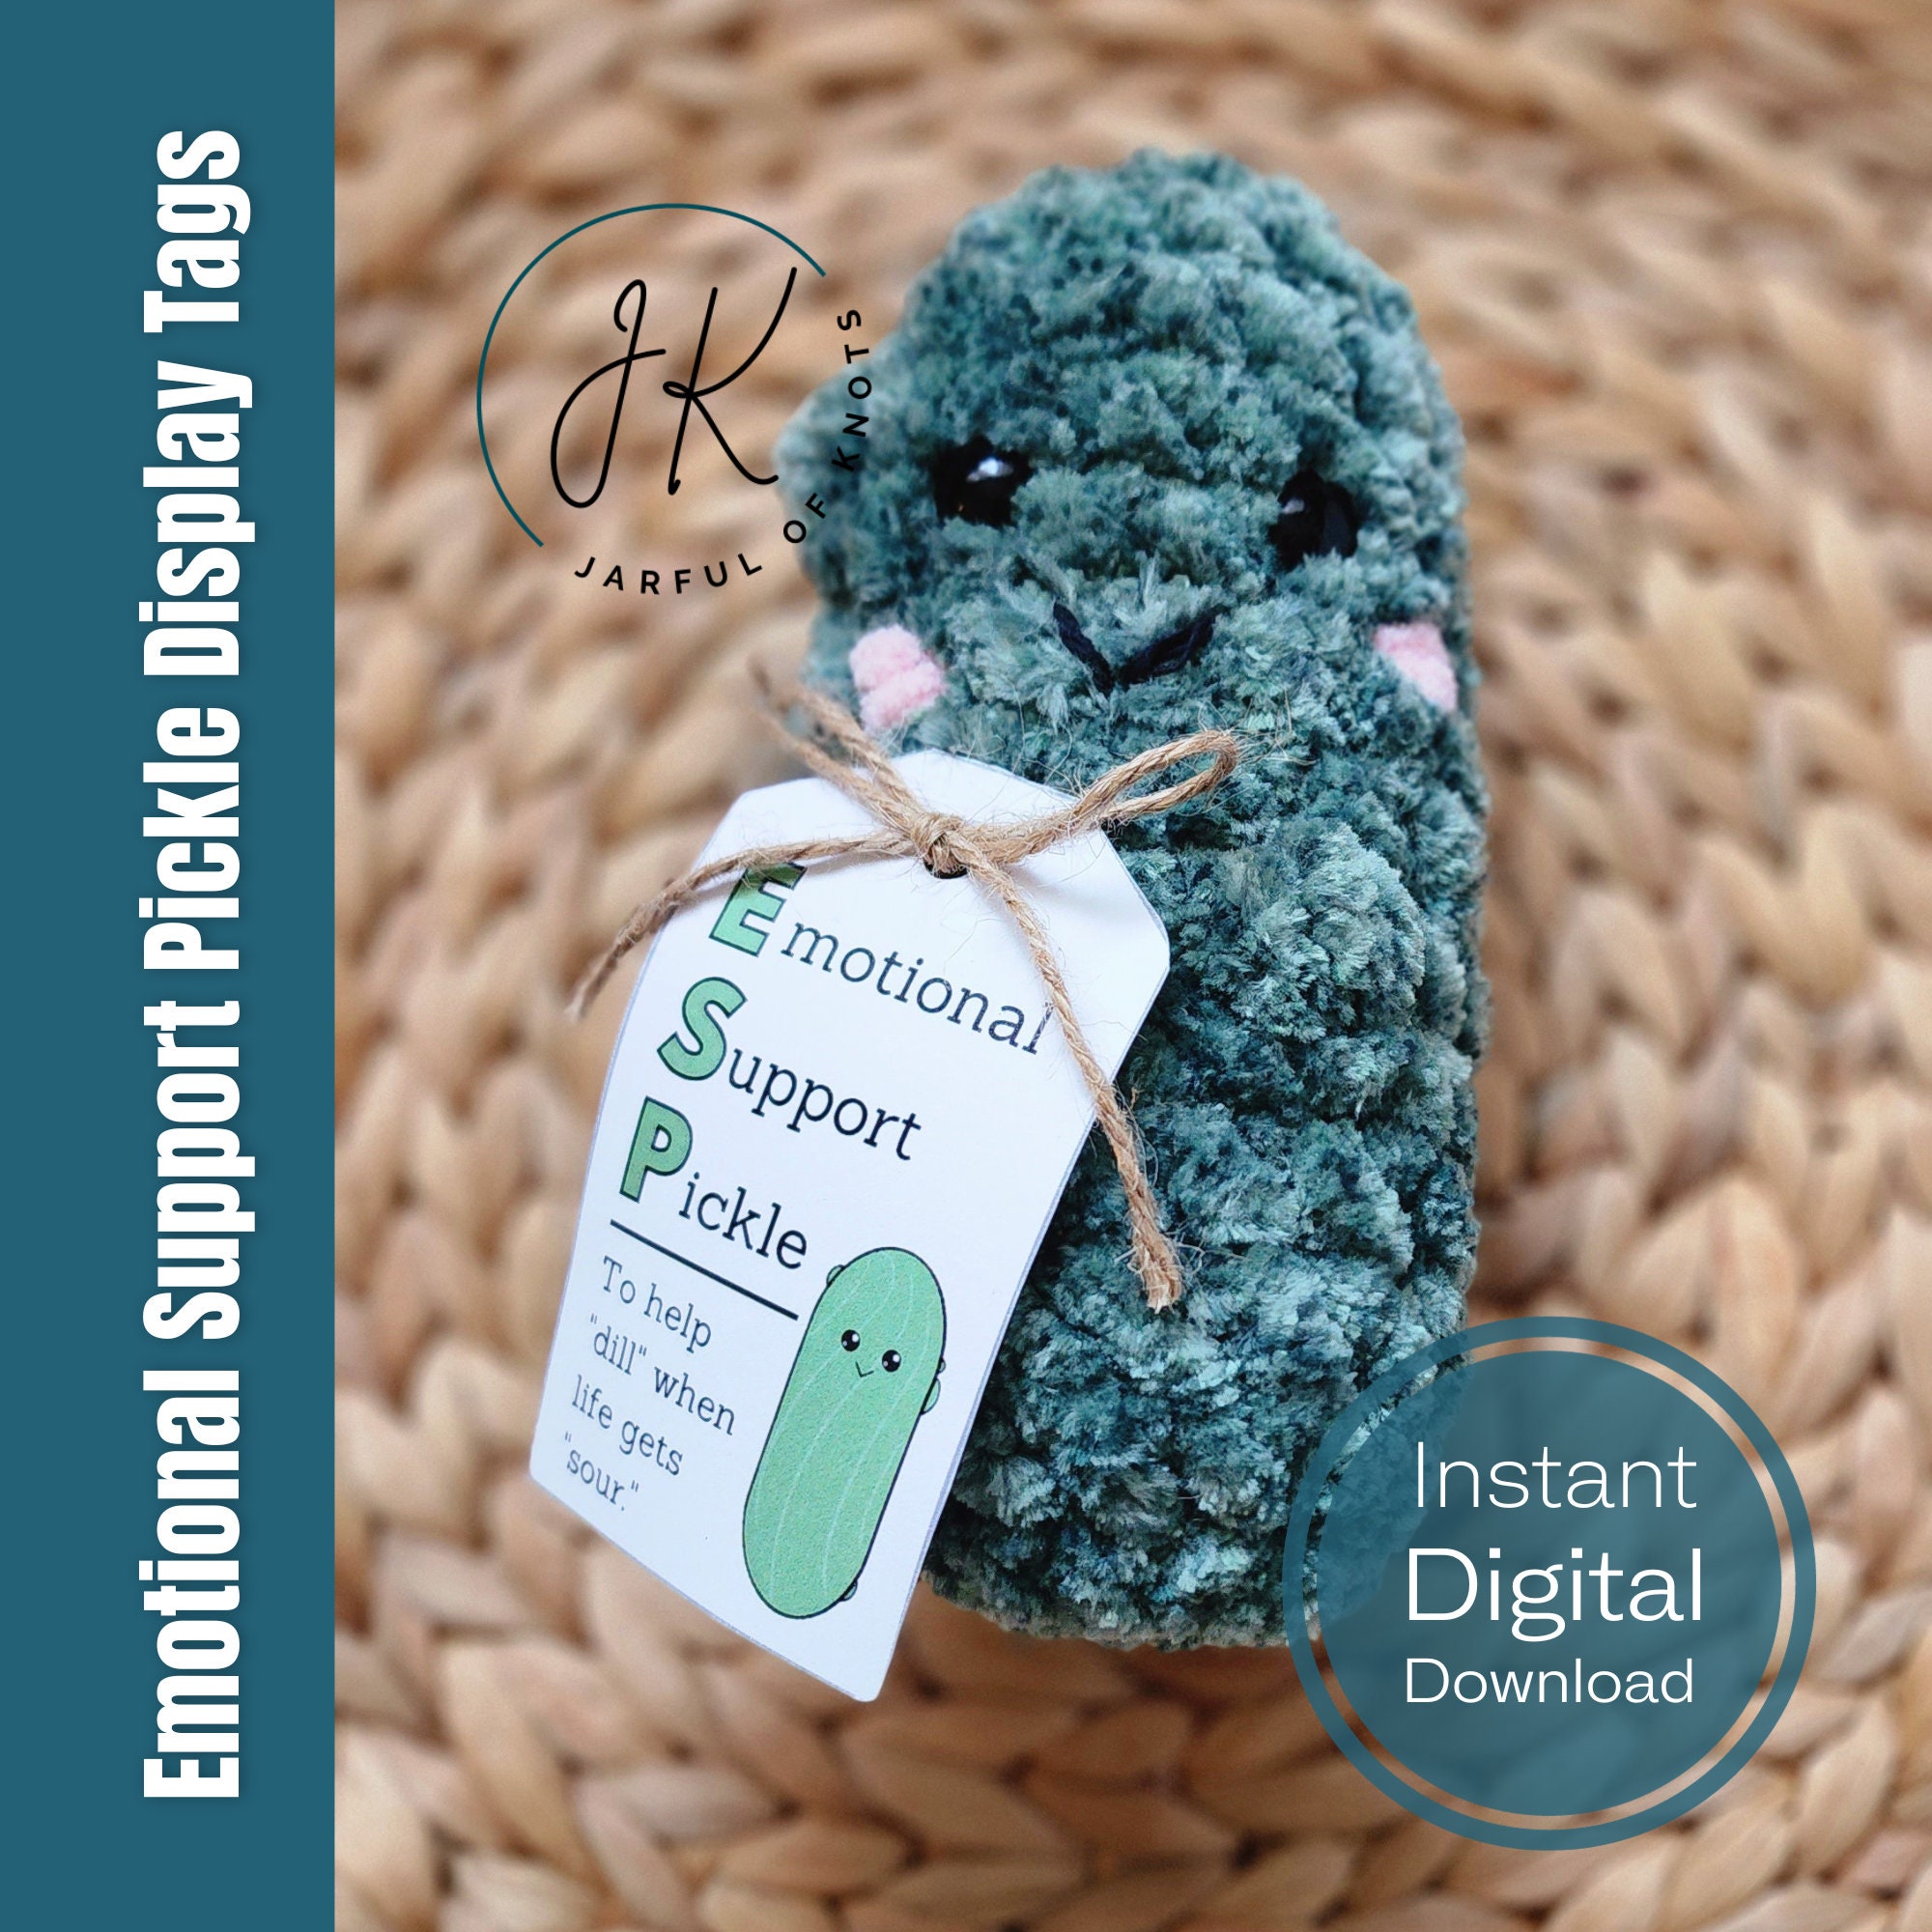 Emotional Support Pickle Crochet Pattern - Electronic Download